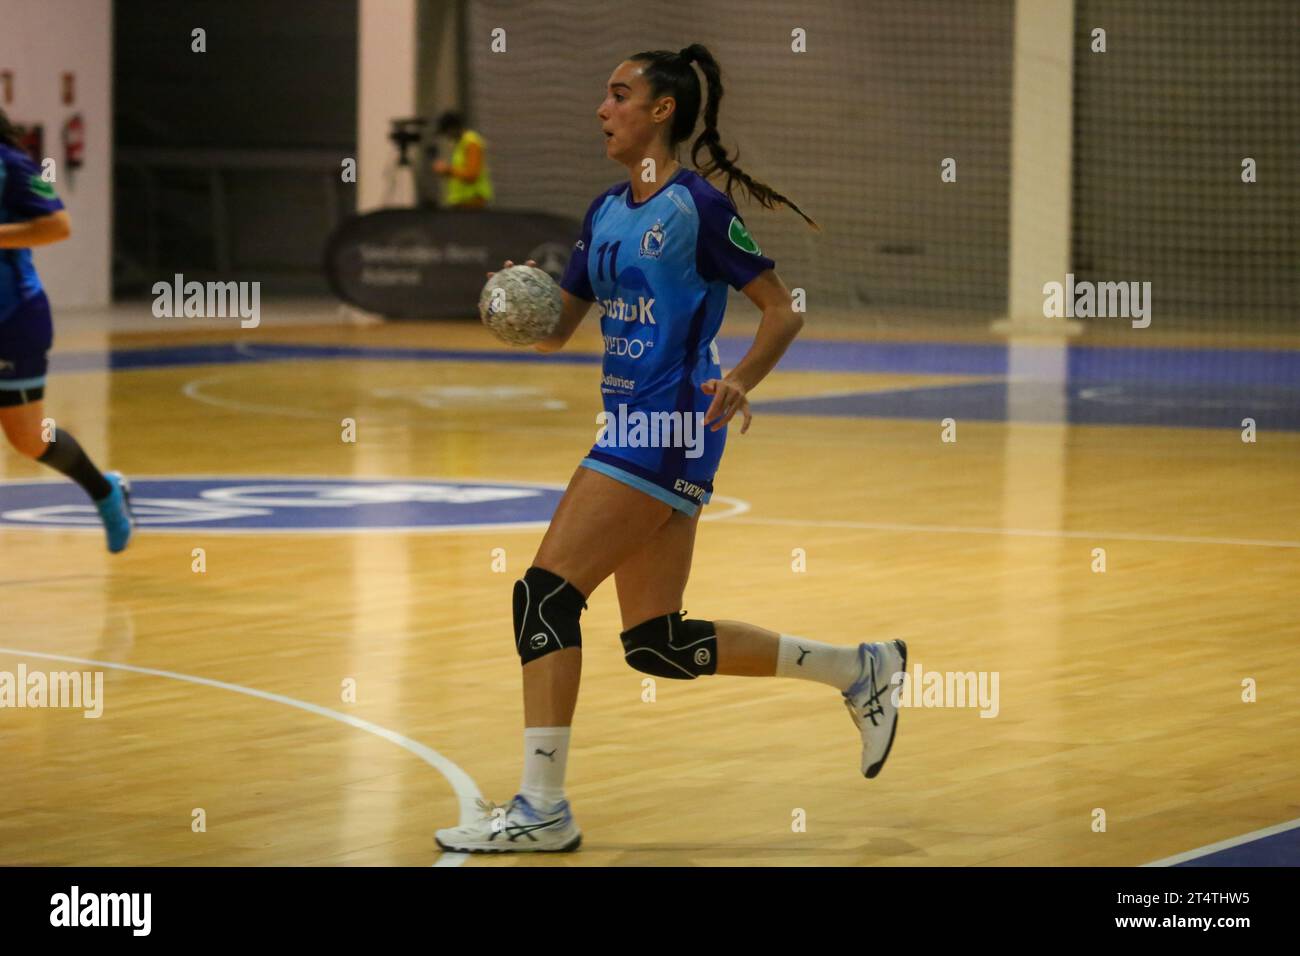 Oviedo, Spain, 1st November, 2023: The player of Lobas Global Atac Oviedo, Elena Martinez (11) with the ball during the 9th Matchday of the Liga Guerreras Iberdrola between Lobas Global Atac Oviedo and Motive.co Gijon Balonmano La Calzada, on November 1, 2023, at the Florida Arena Municipal Sports Center, in Oviedo, Spain. Credit: Alberto Brevers / Alamy Live News. Stock Photo